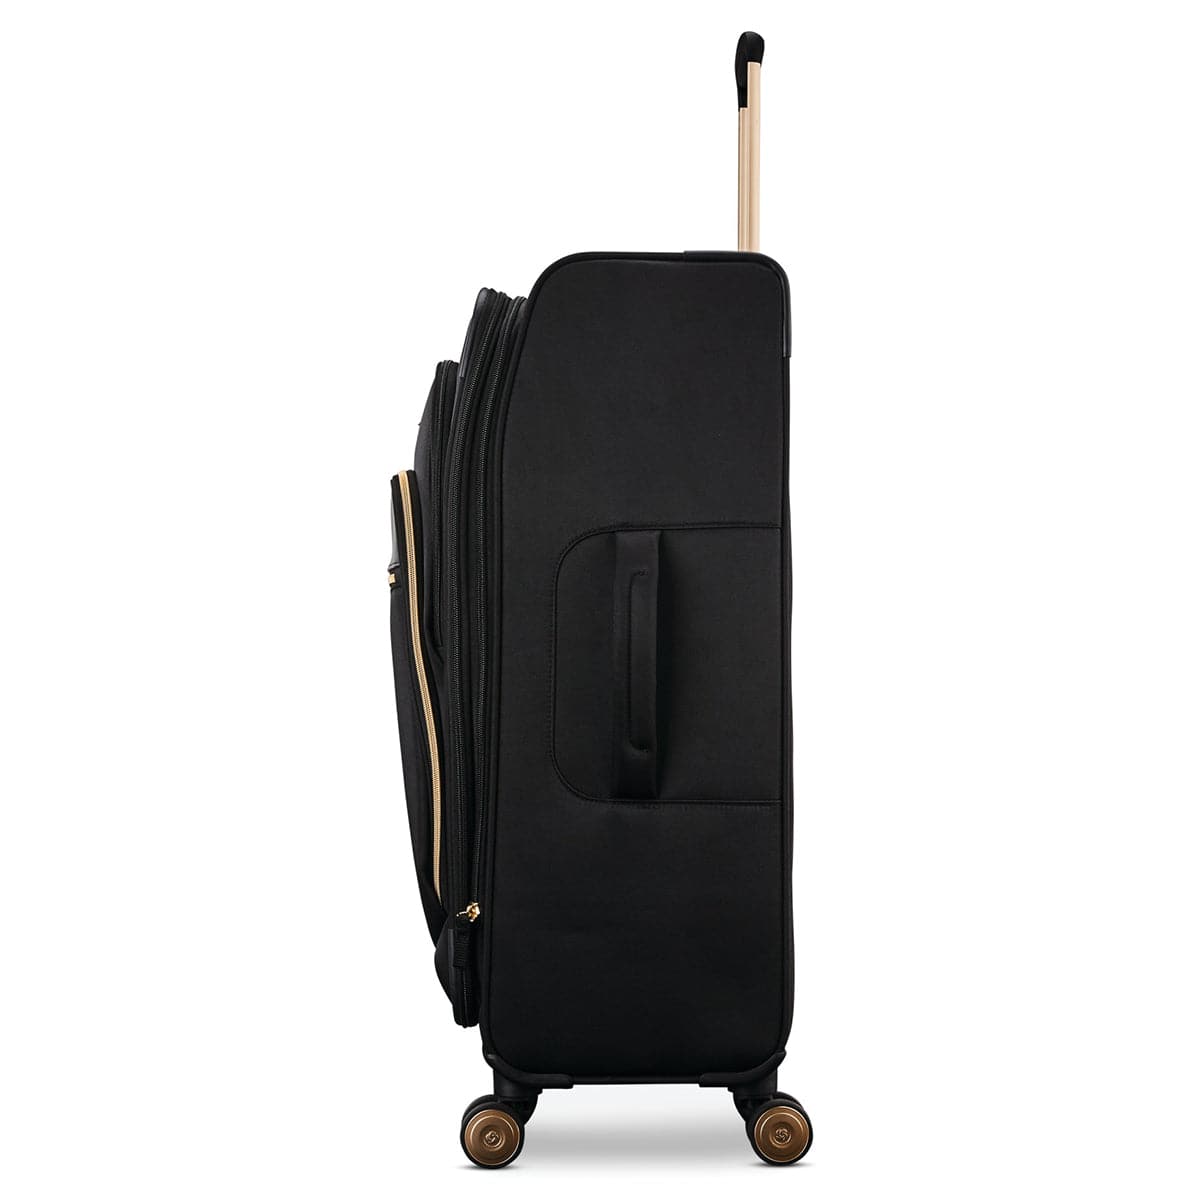 Samsonite Mobile Solution Softside Expandable 25" Spinner Carry-On Luggage